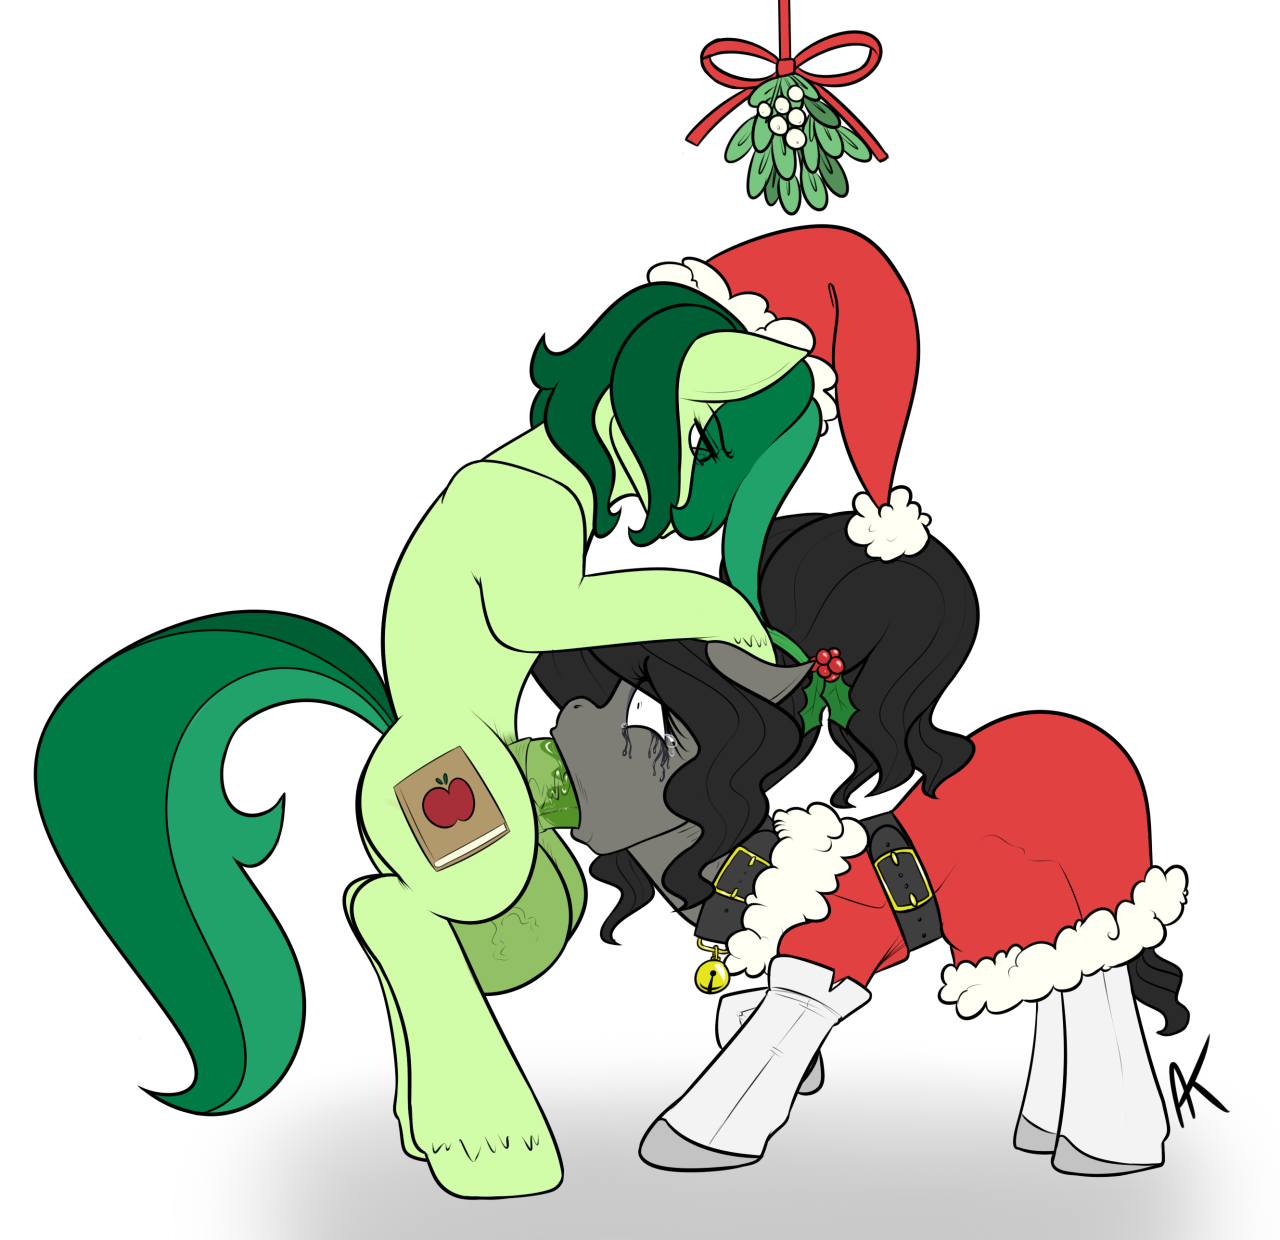 appels-dark-corner:  For @mcsweezy‘s mistletoe thing with Nikita. Appel knows what